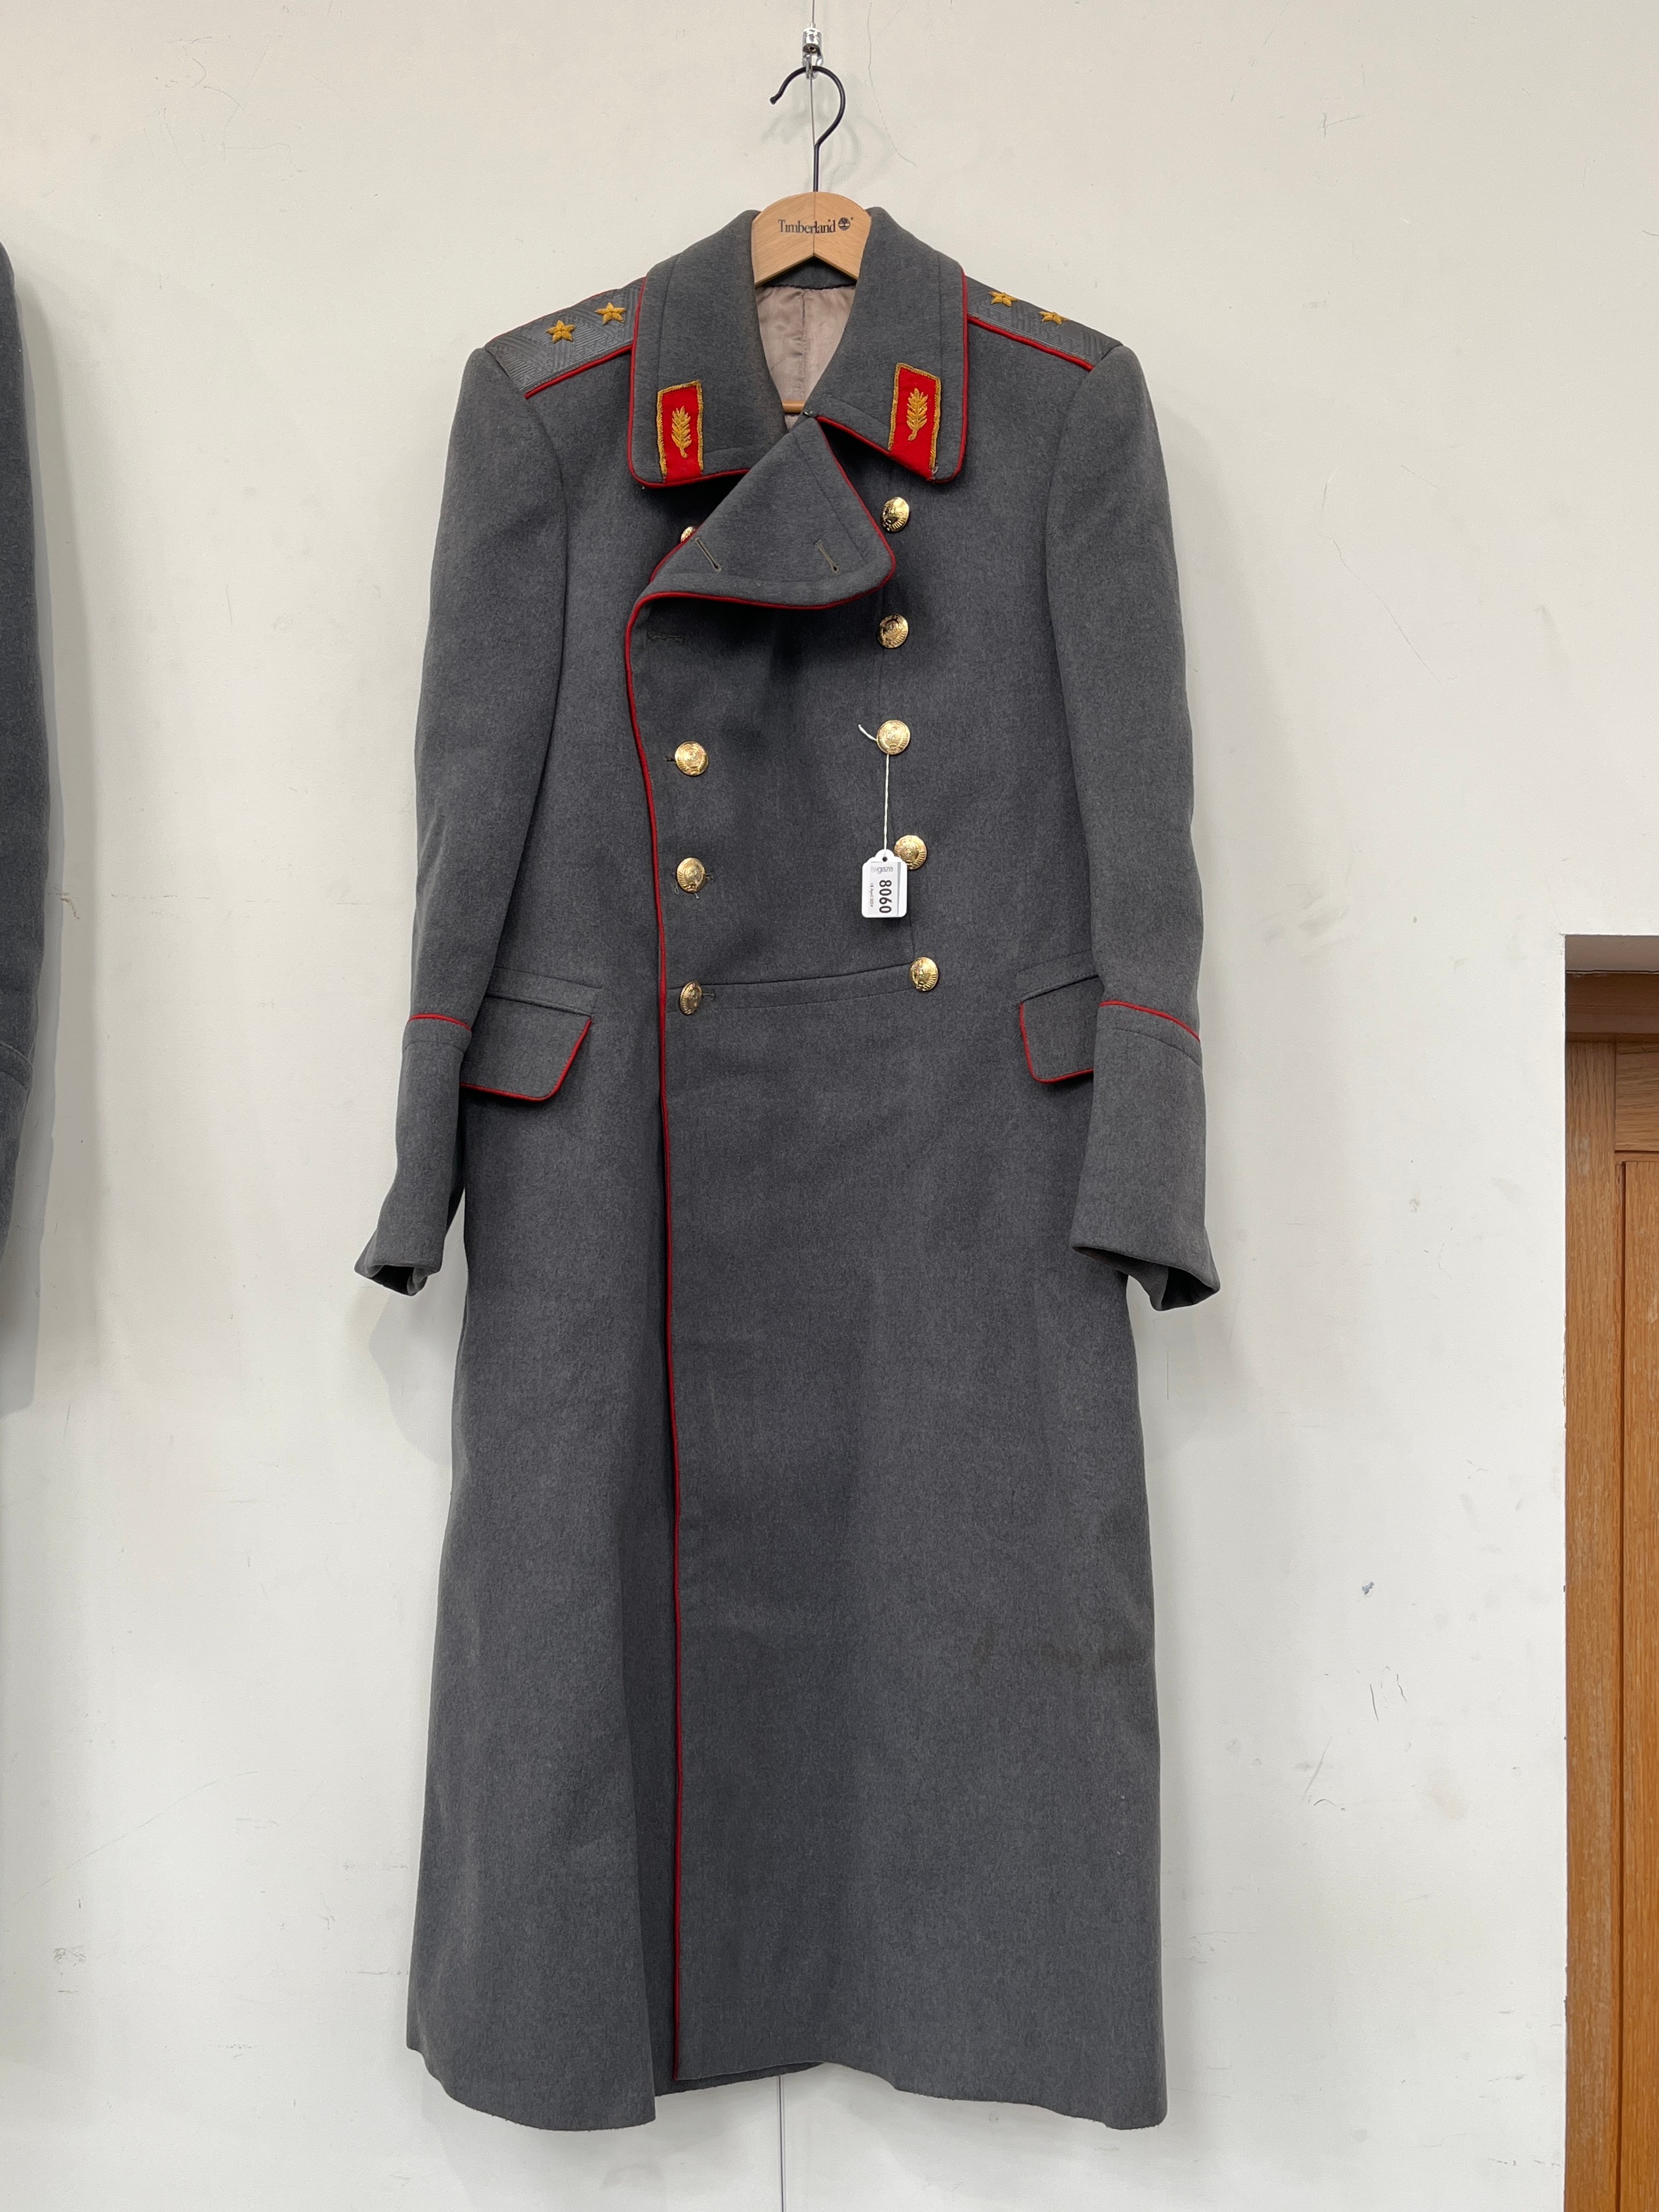 A USSR Russian Soviet army overcoat, grey with red piping and insignia